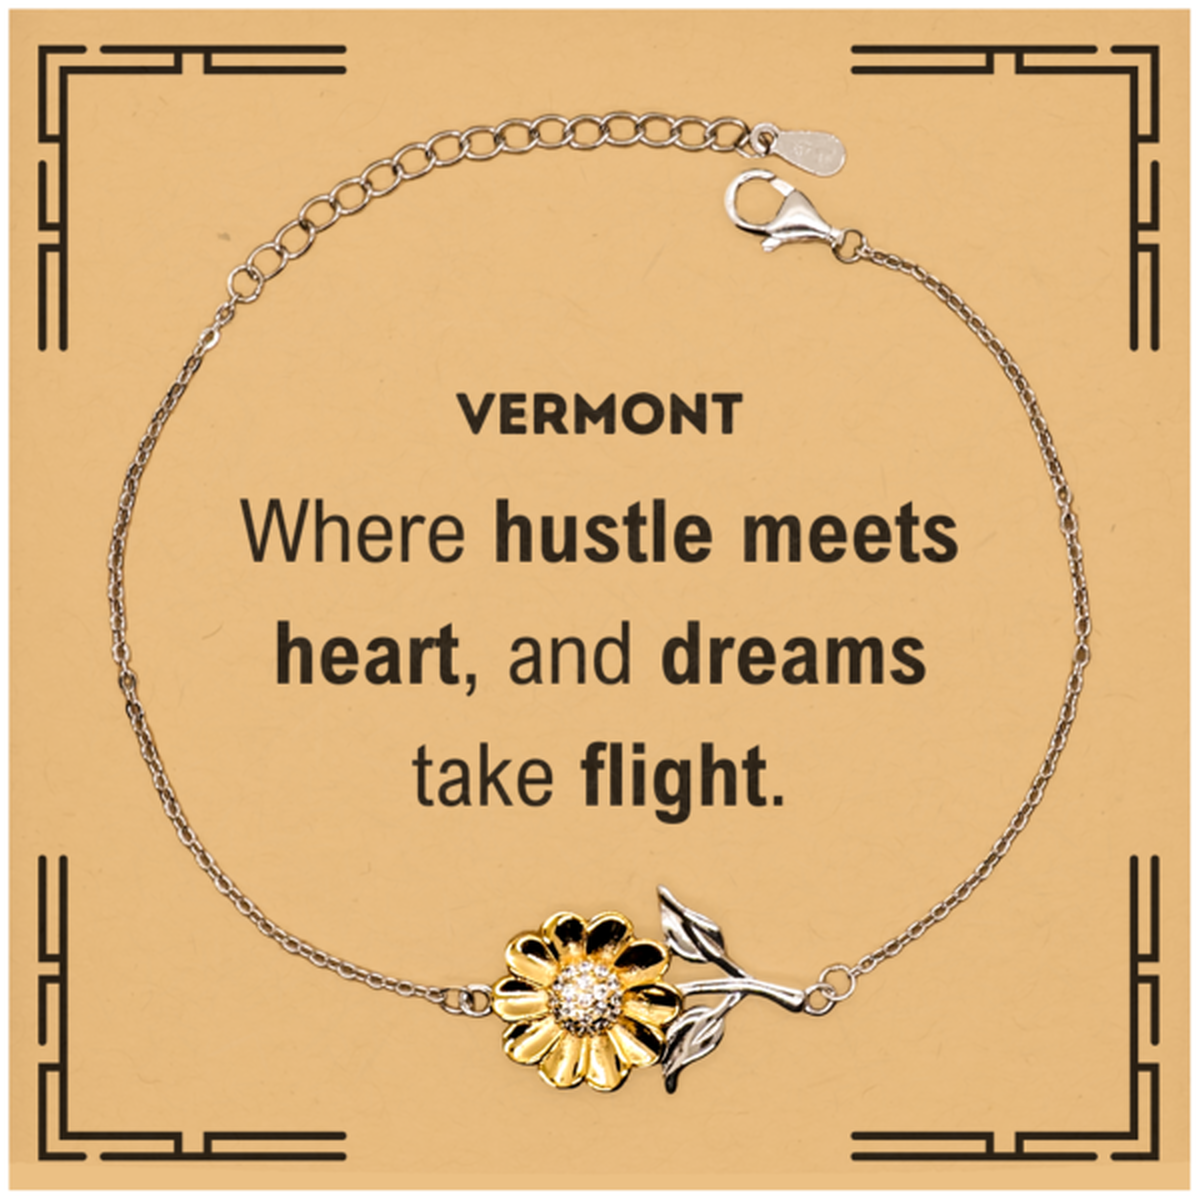 Vermont: Where hustle meets heart, and dreams take flight, Vermont Card Gifts, Proud Vermont Christmas Birthday Vermont Sunflower Bracelet, Vermont State People, Men, Women, Friends